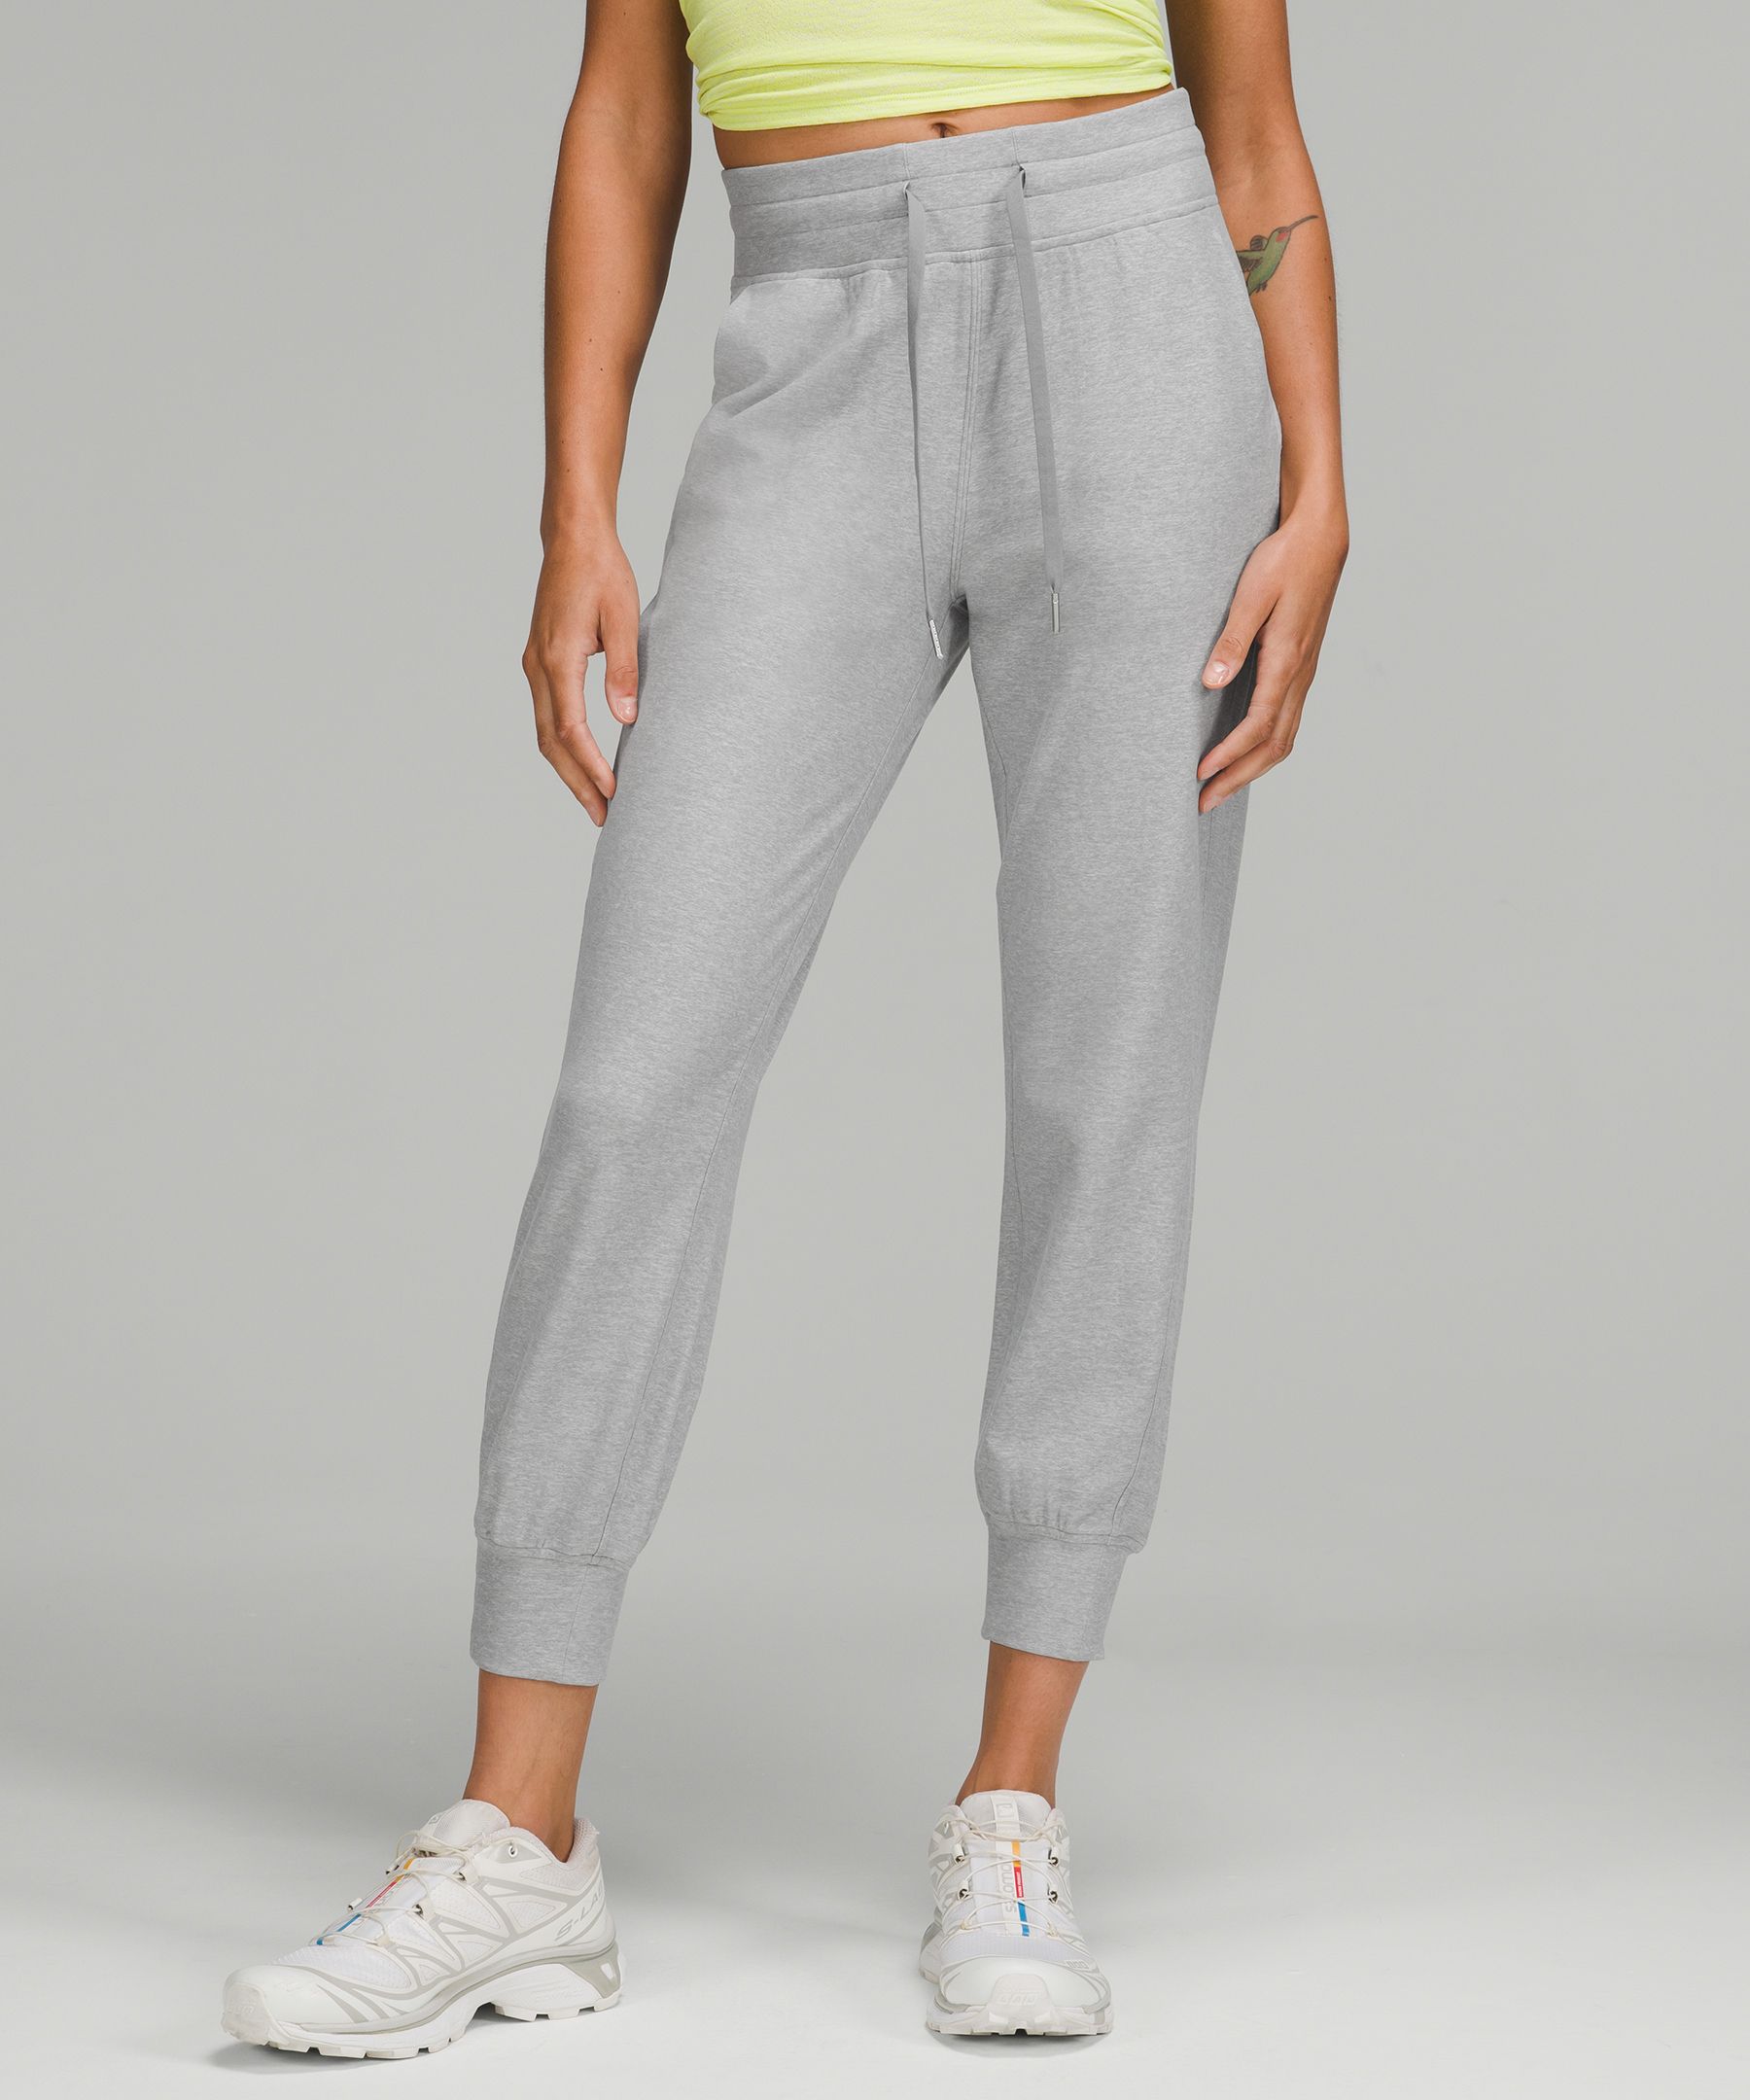 Ready to Rulu High-Rise Jogger 7/8 Length | Women's Joggers